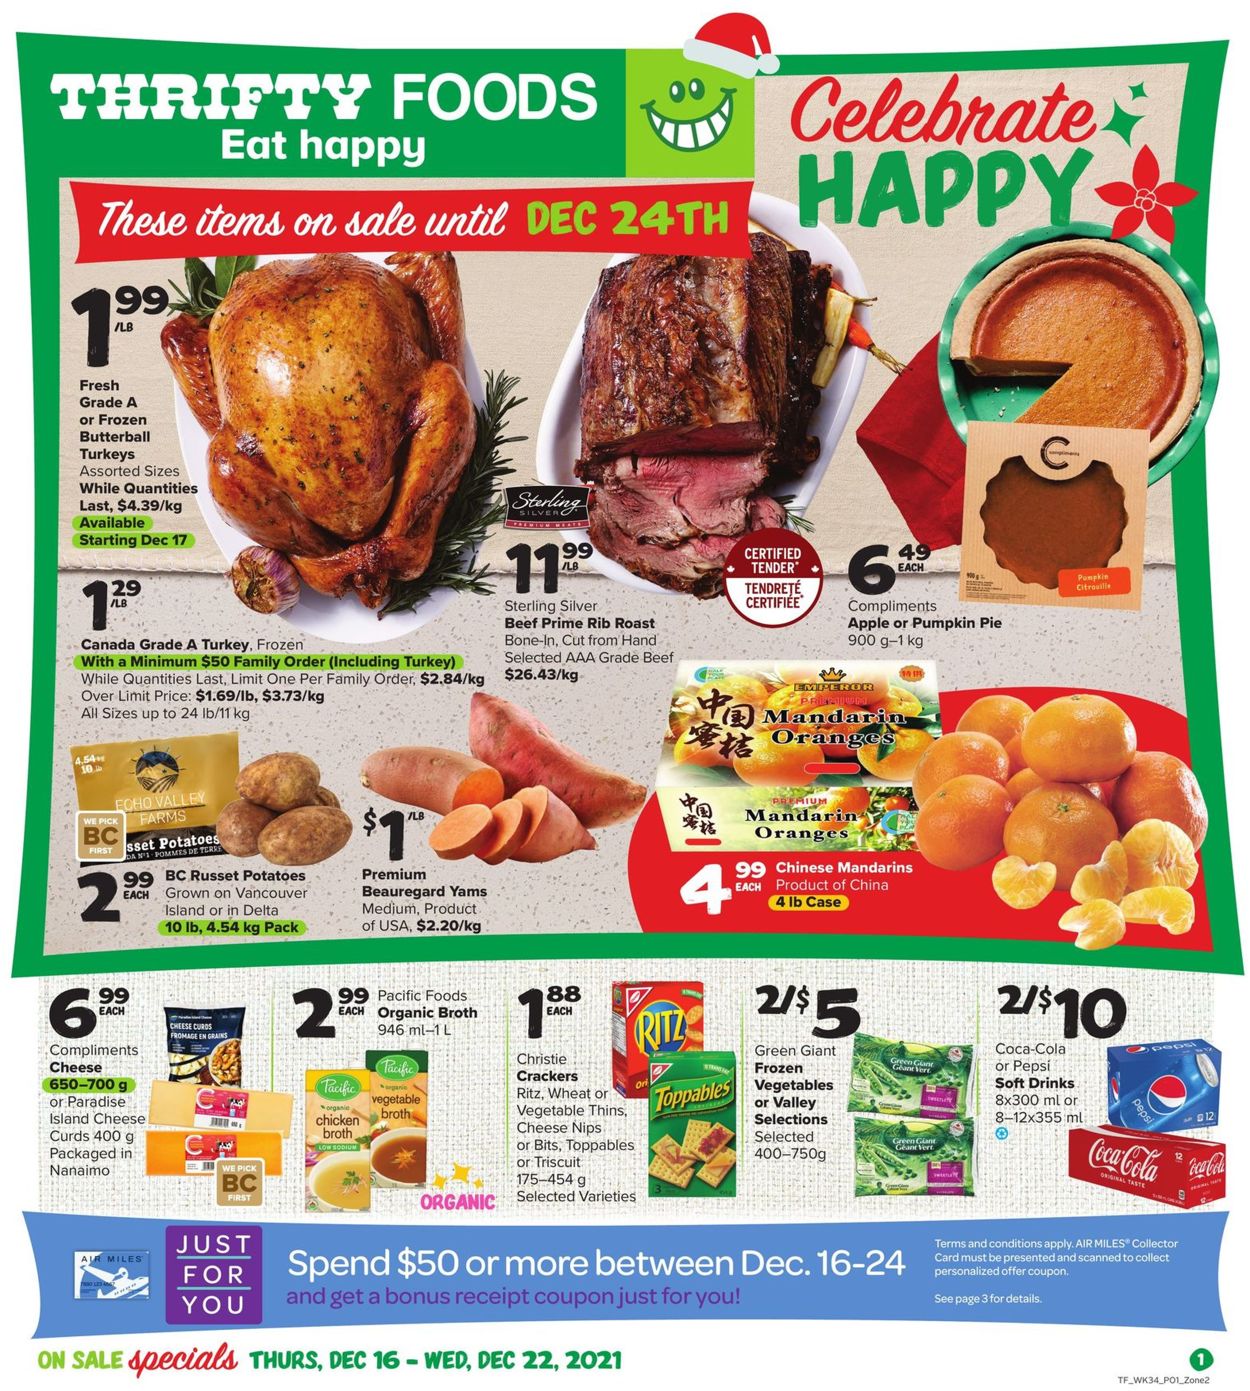 Thrifty Foods HOLIDAYS 2021 Flyer - 12/16-12/22/2021